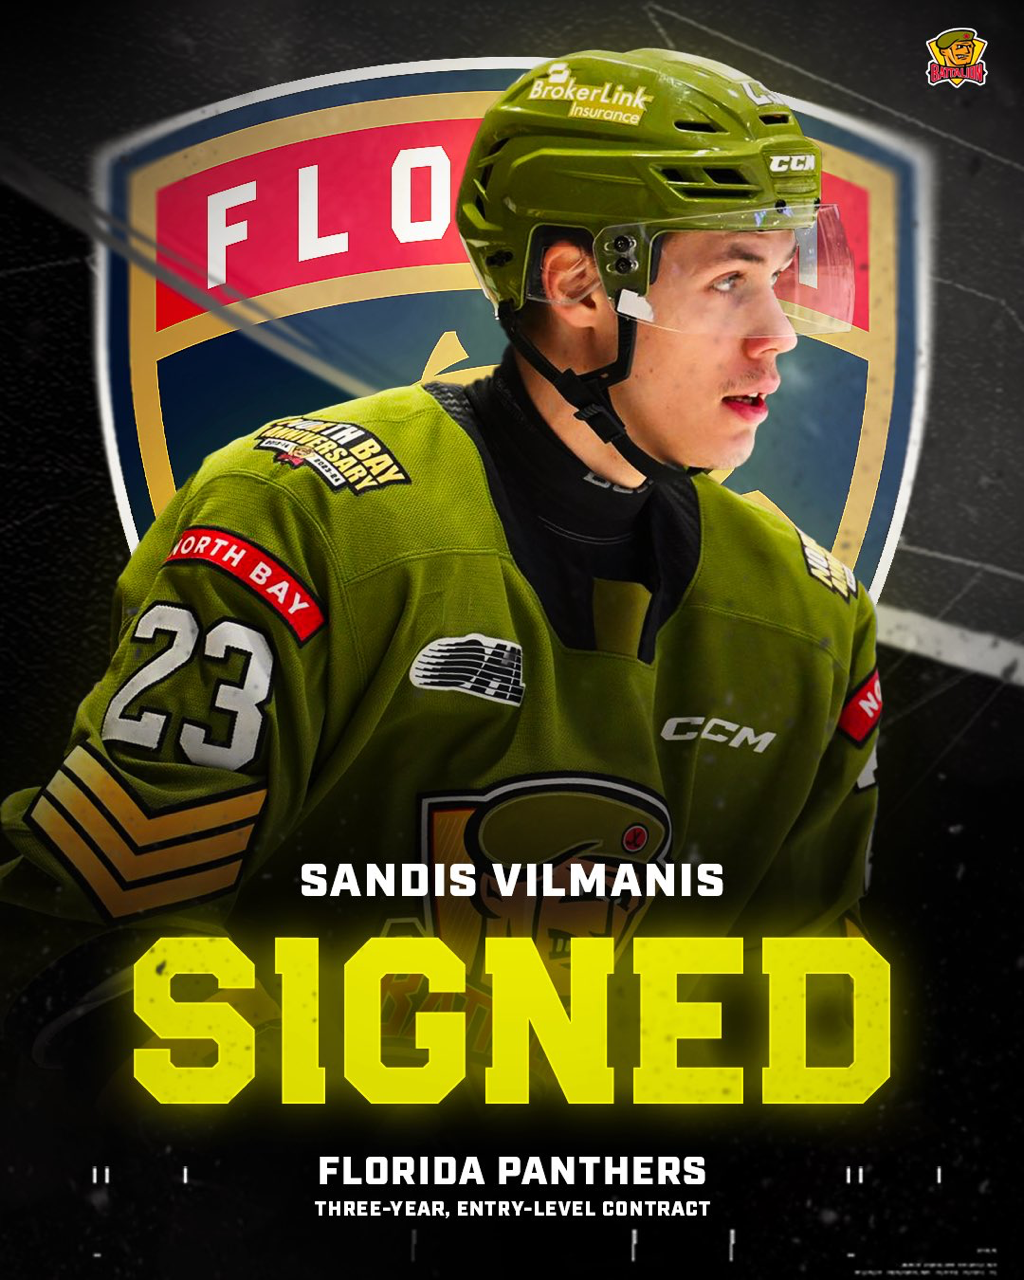 Sandis Vilmanis signs deal with Florida Panthers